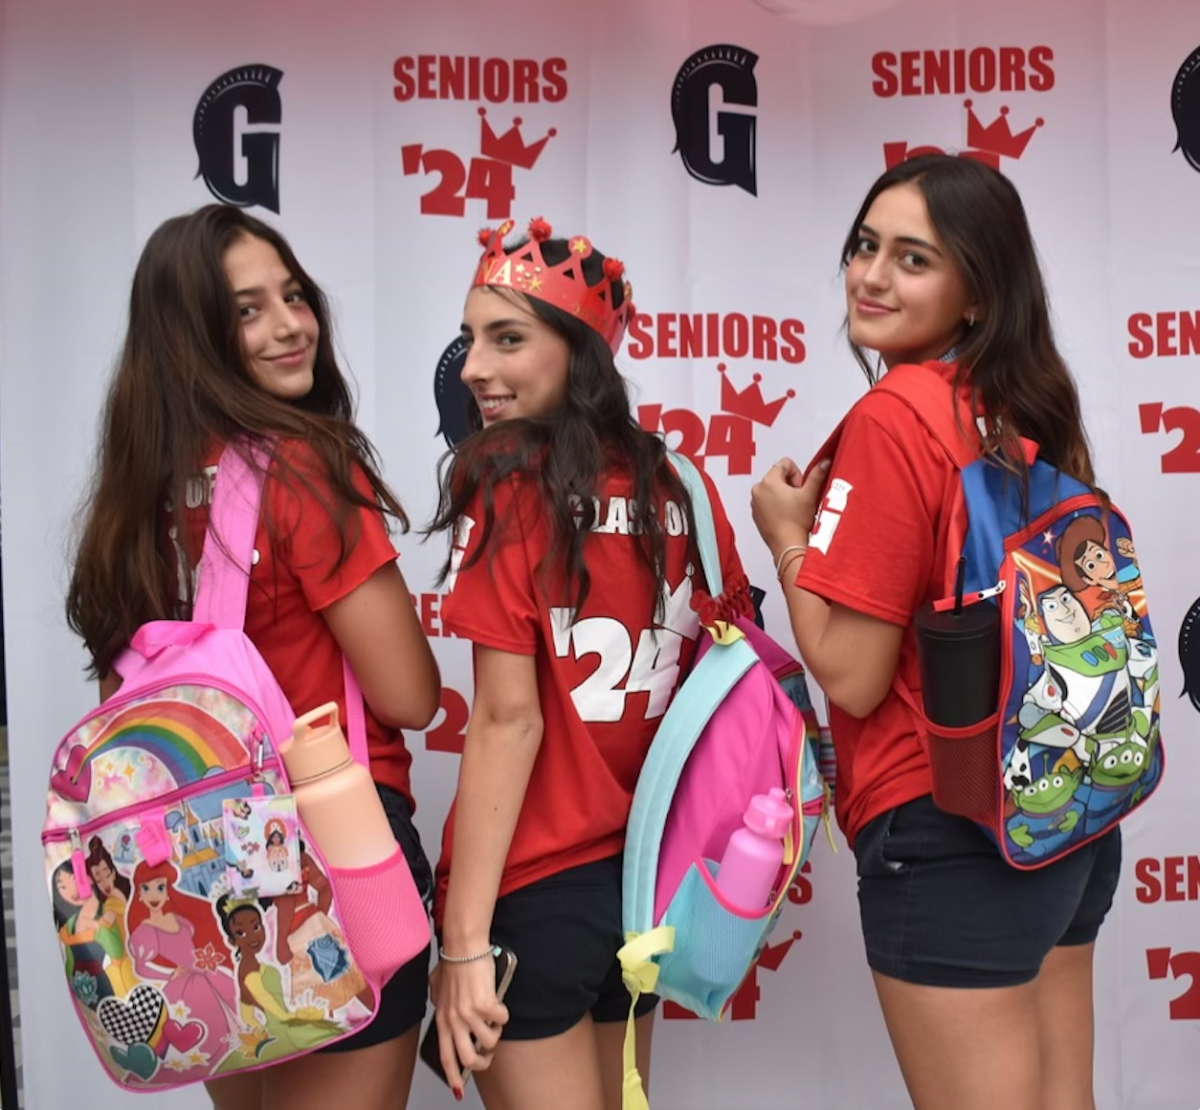 As+seniors+enter+school+for+their+last+first+day%2C+they+carry+the+one+thing+that+allows+them+to+reminisce+about+their+first+days+of+school%3A+character+backpacks.+Luciana+Hornstein%2C+Ana+Catherine+Guimaraes%2C+and+Sofia+Gershanik+showed+off+their+backpacks+in+front+of+the+senior+backdrop.+Seniors+were+excited+to+rock+backpacks+with+a+variety+of+childish+prints.+